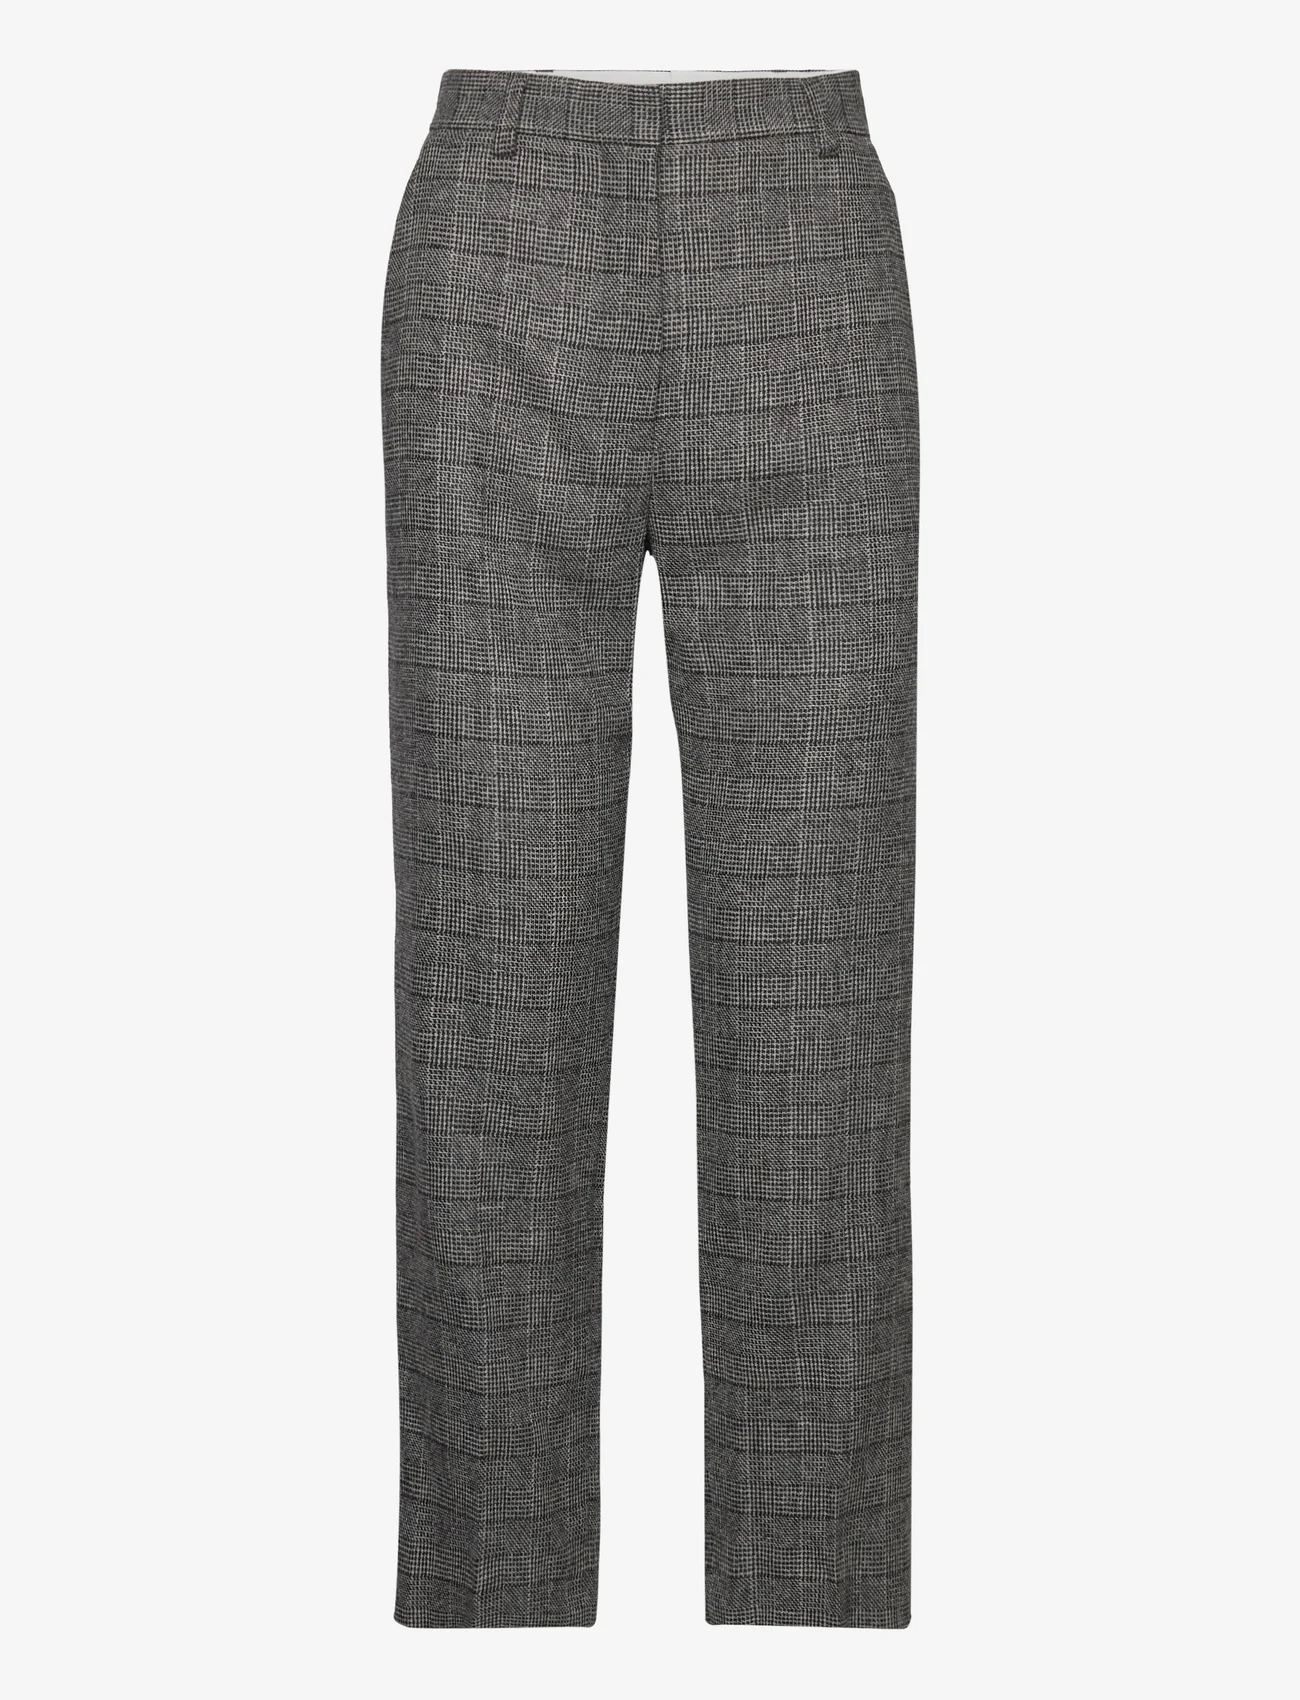 Day Birger et Mikkelsen - Classic Lady - Classic Wool Check - tailored trousers - medium grey melange - 0